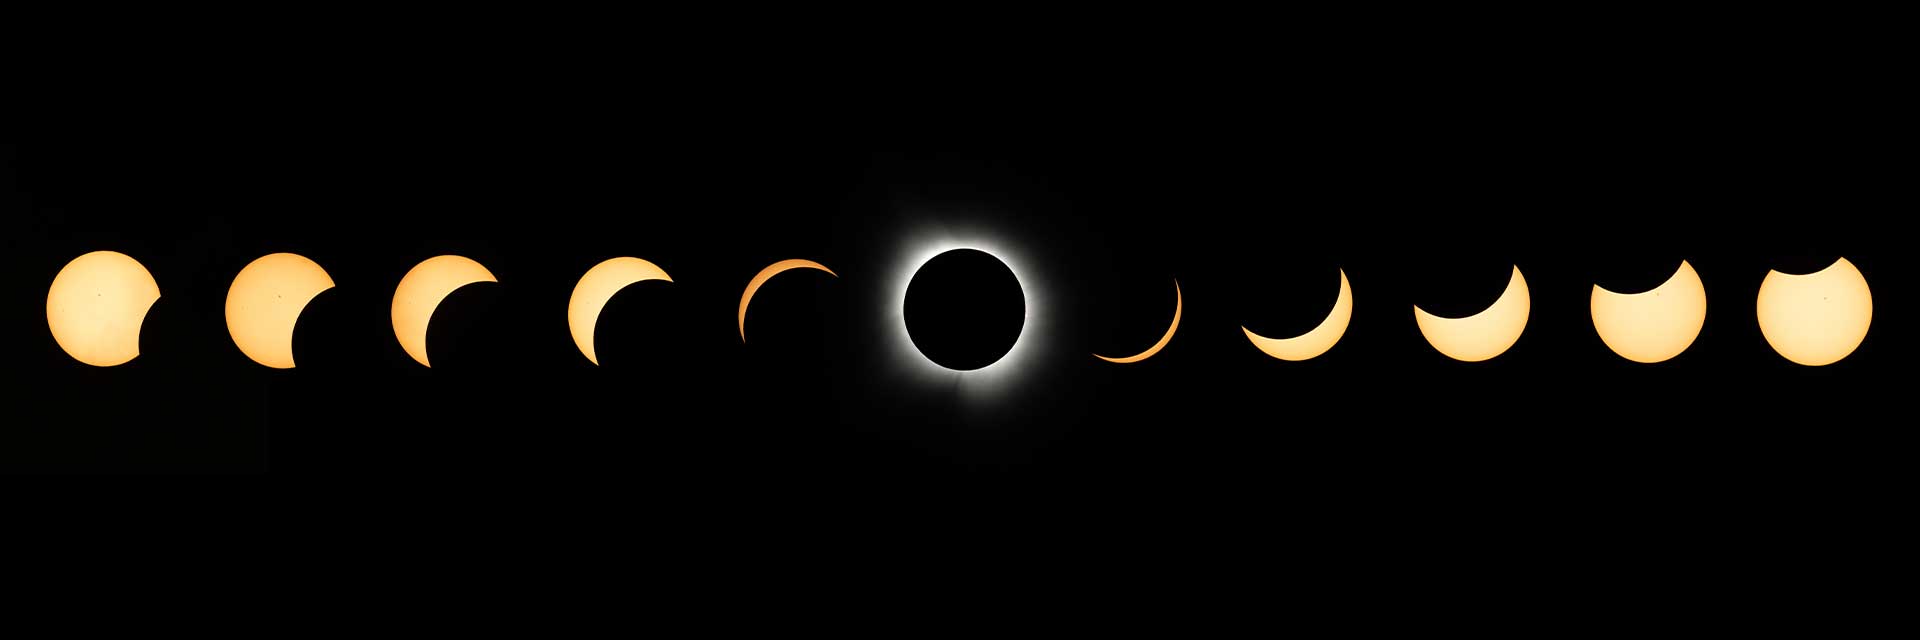 A strip of images showing the Sun in different stages of being eclipsed by the Moon.